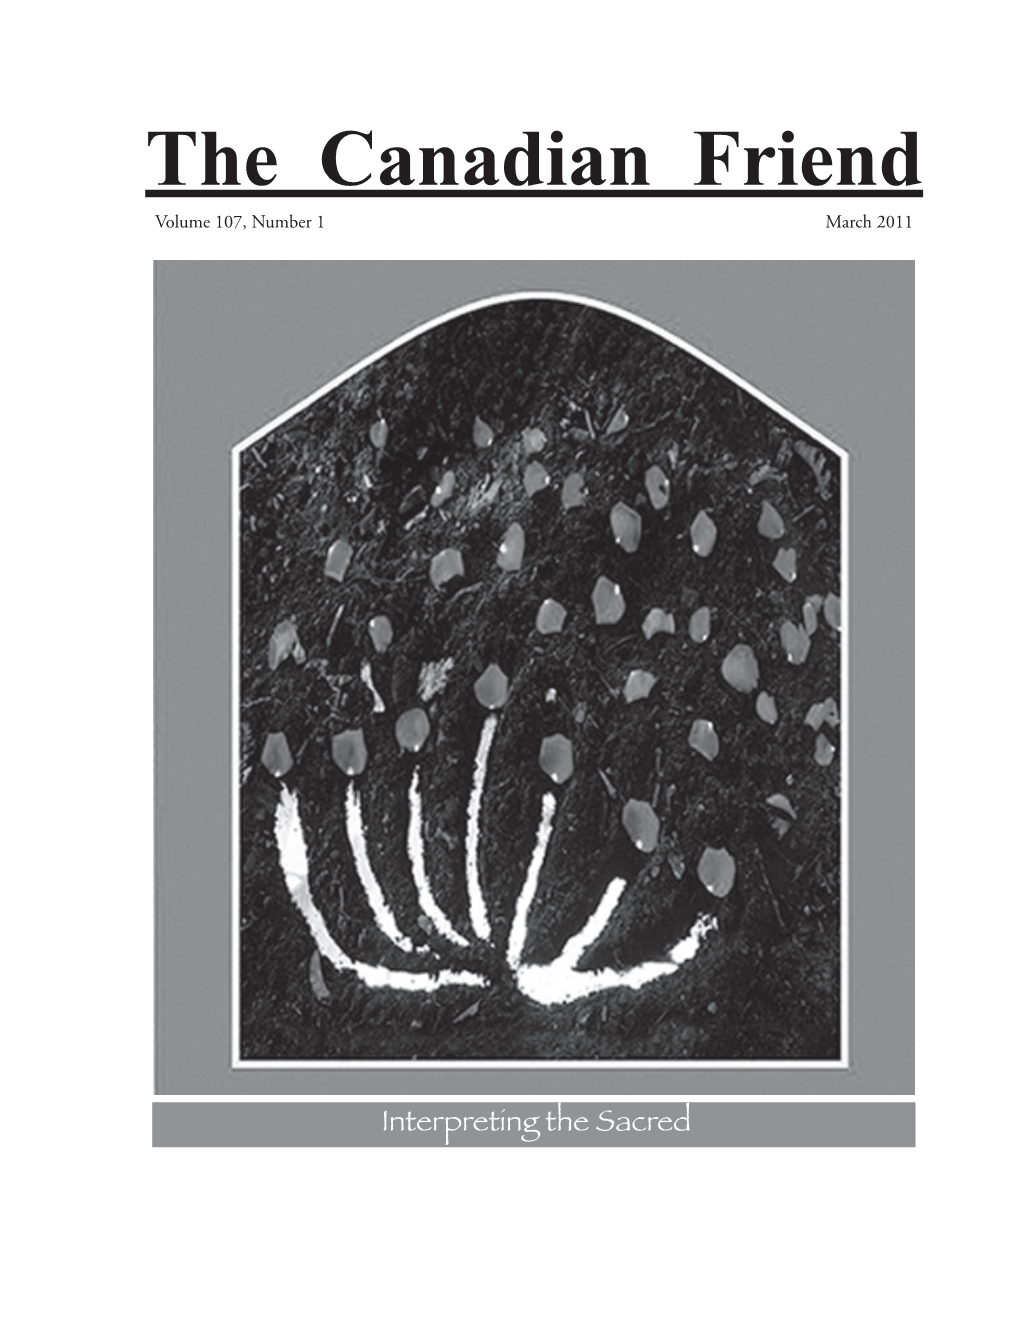 The Canadian Friend Volume 107, Number 1 March 2011